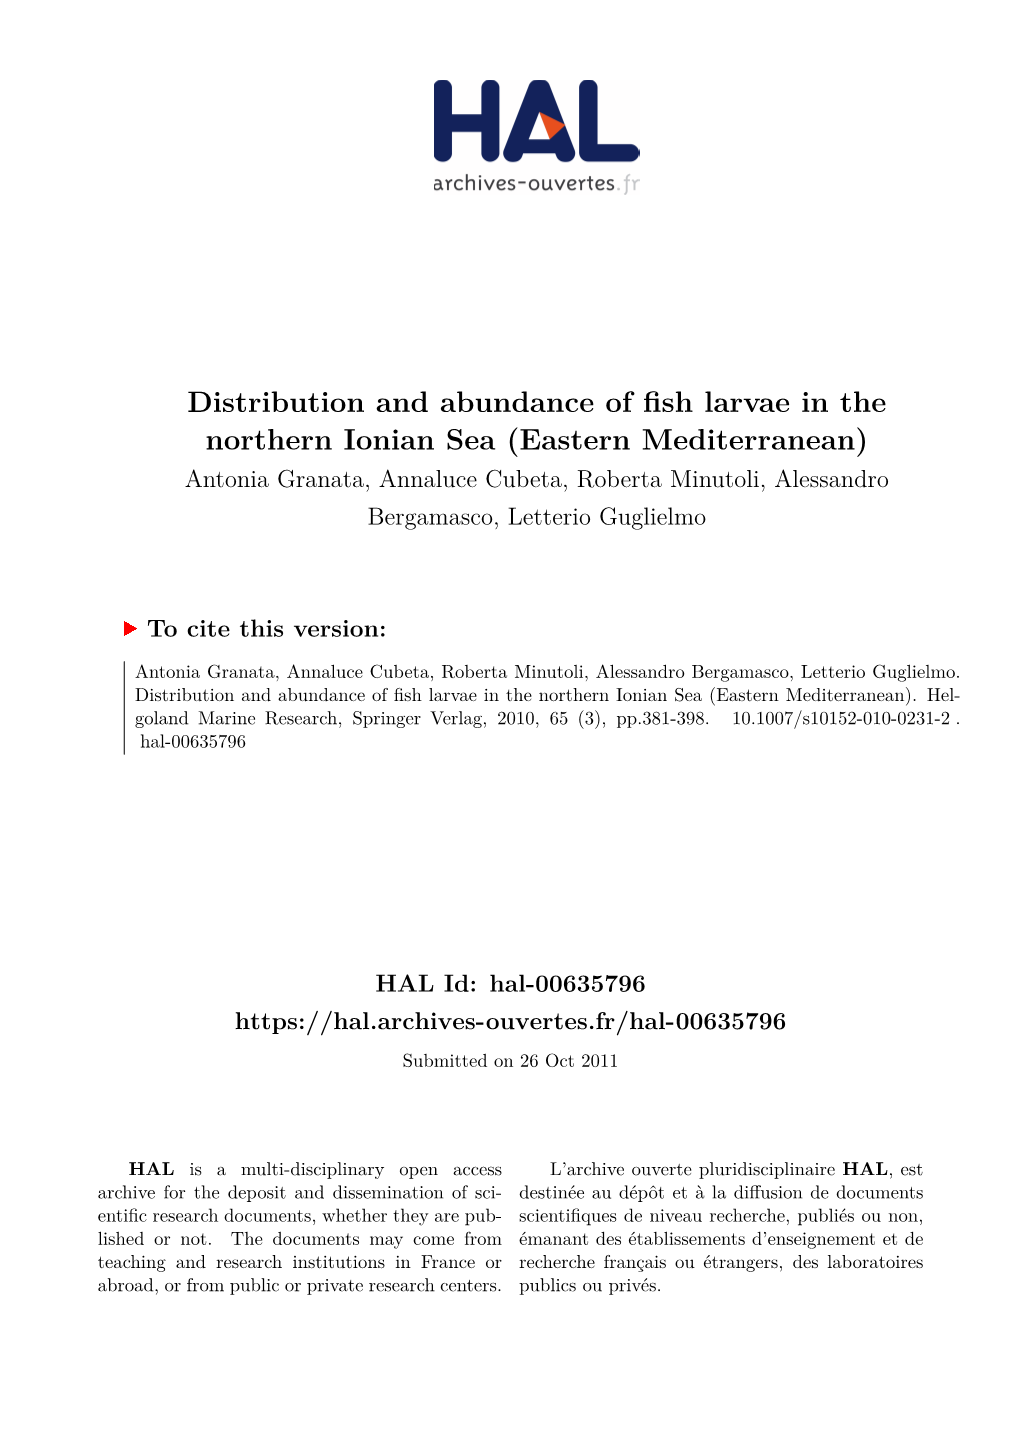 Distribution and Abundance of Fish Larvae in the Northern Ionian Sea (Eastern Mediterranean)